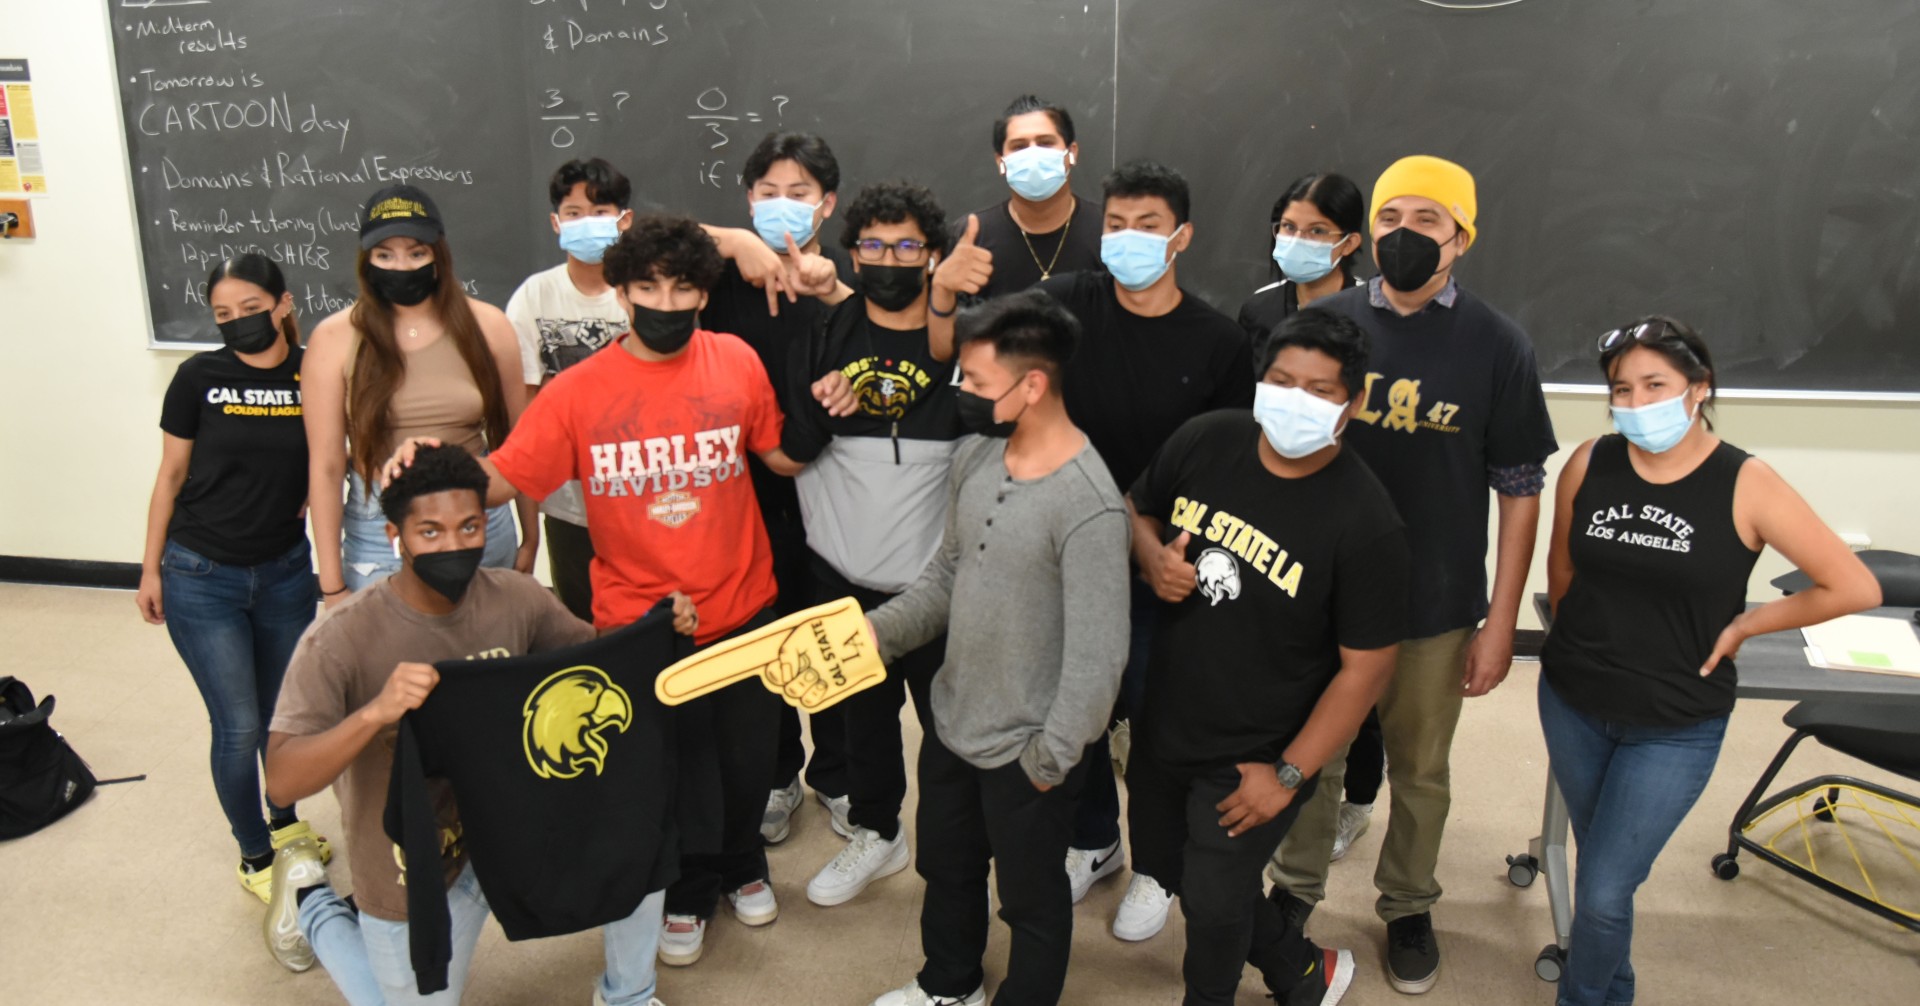 A group of students wearing facial coverings posing inside a classroom.